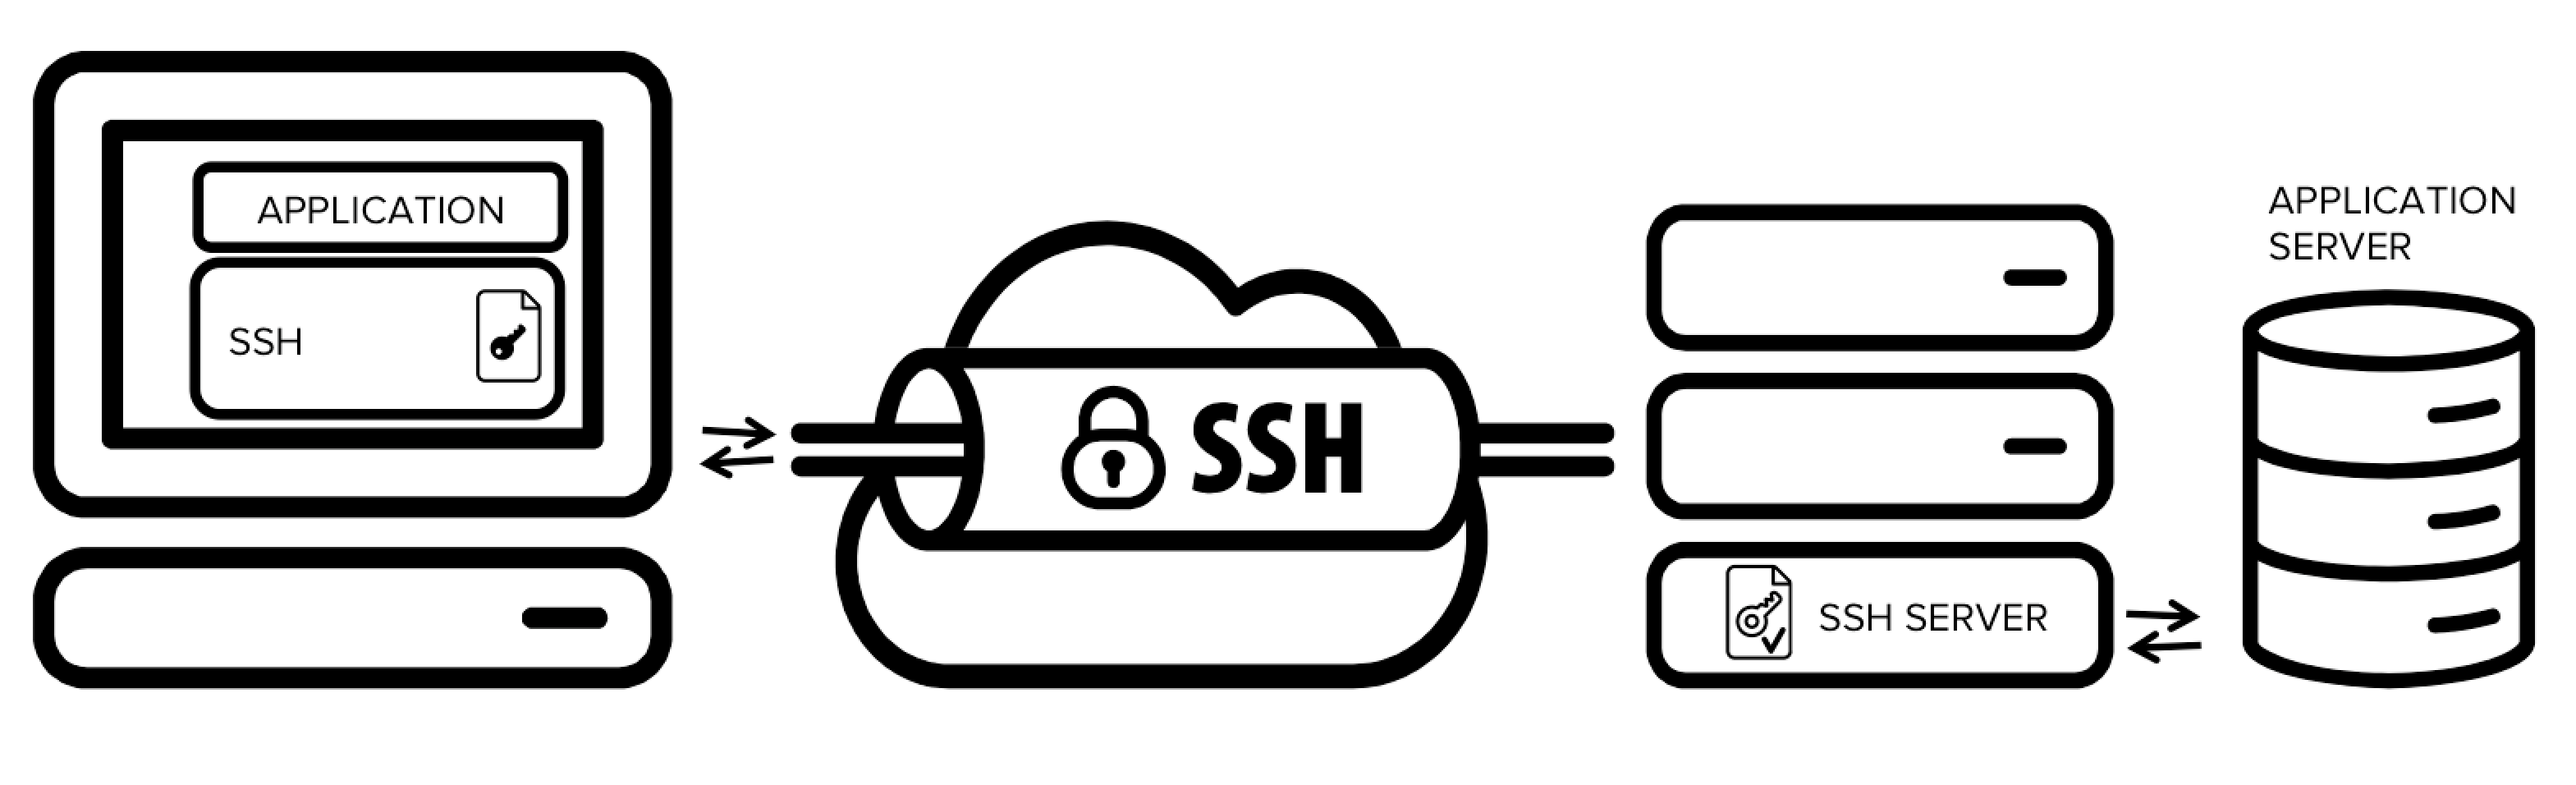 Securing applications with ssh tunneling/port forwarding